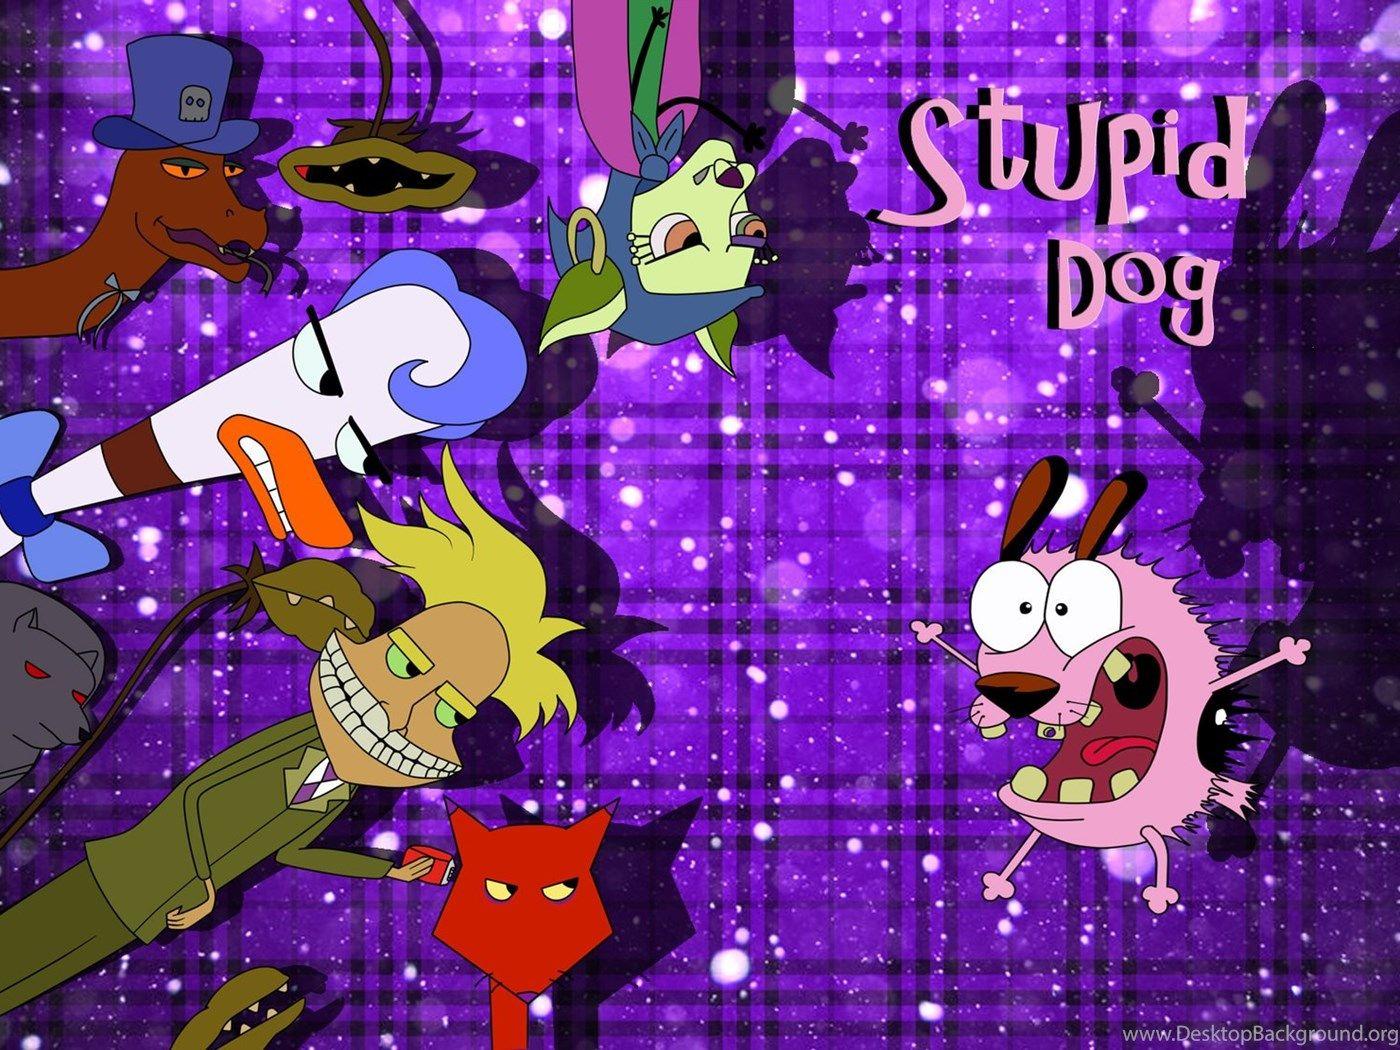 Download Courage The Cowardly Dog HD Wallpaper. Courage